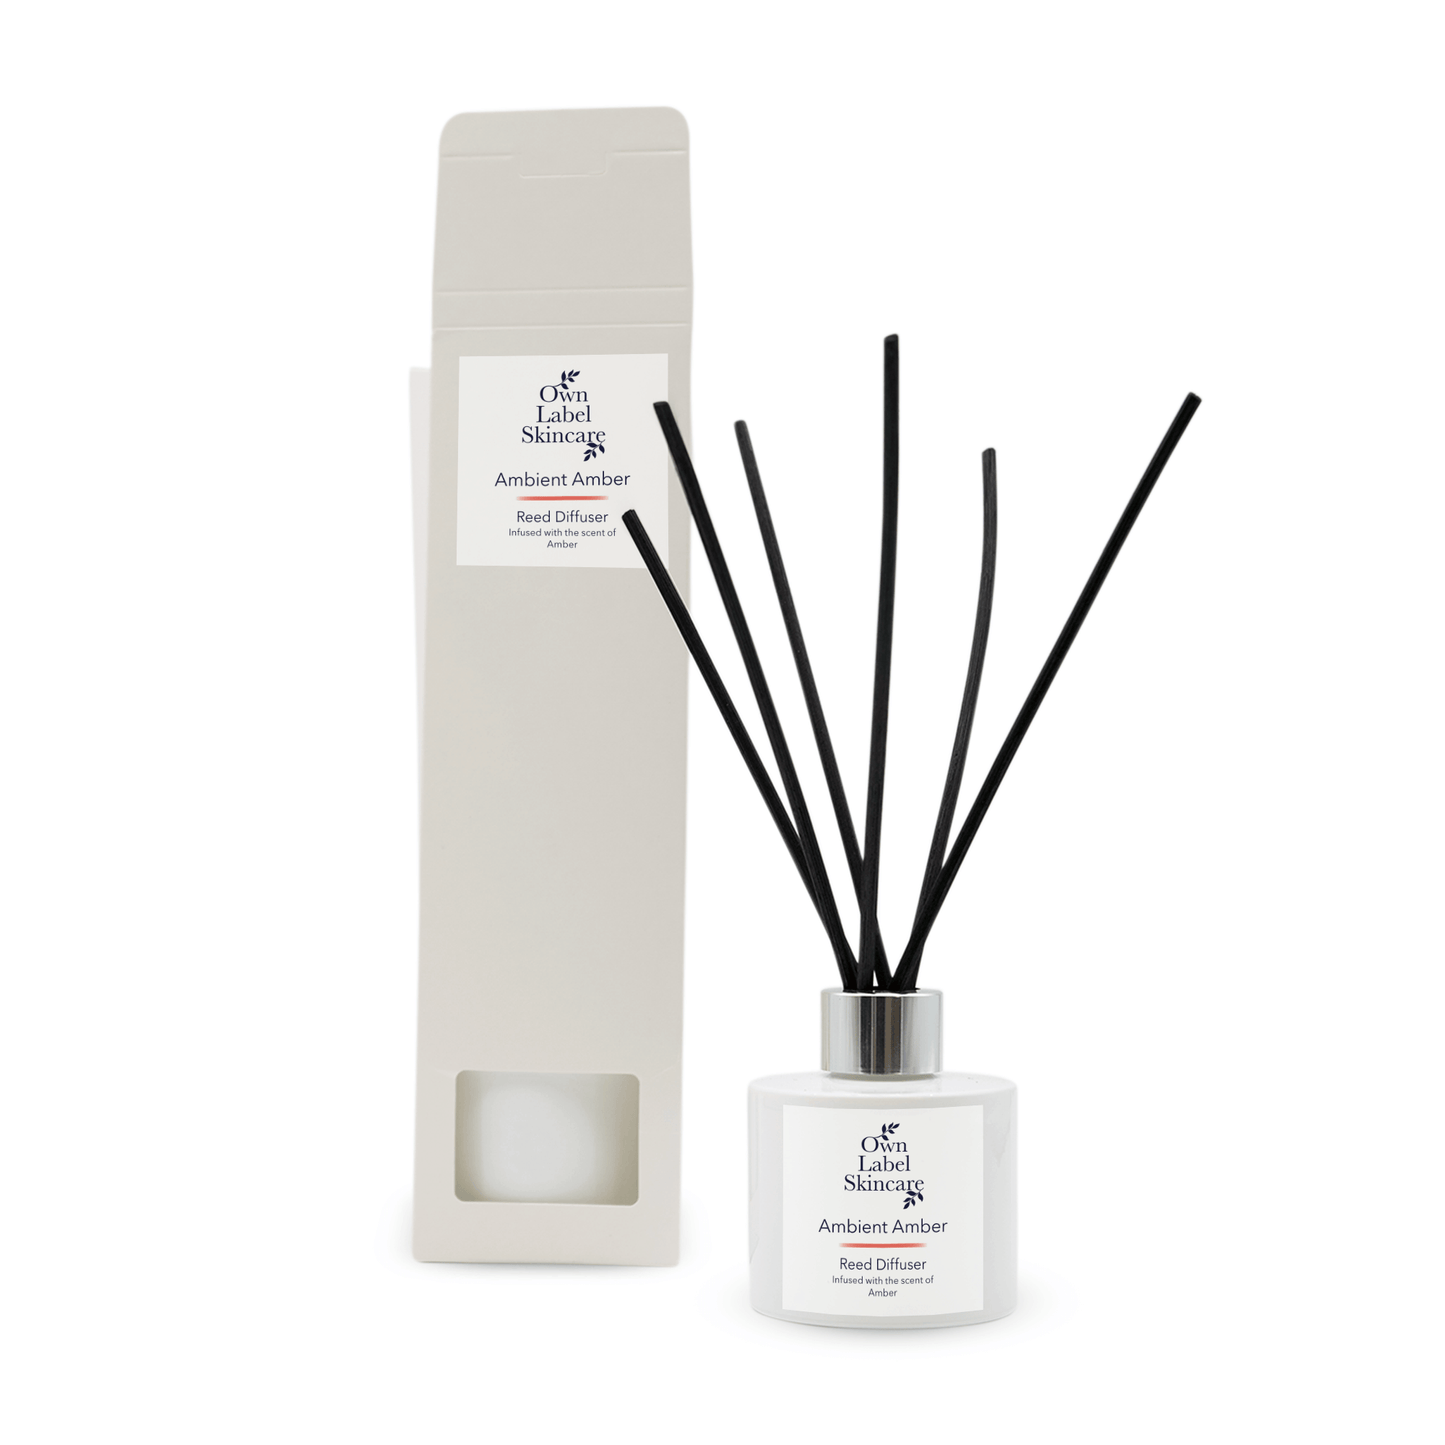 Ambient Amber Reed Diffuser Own Label